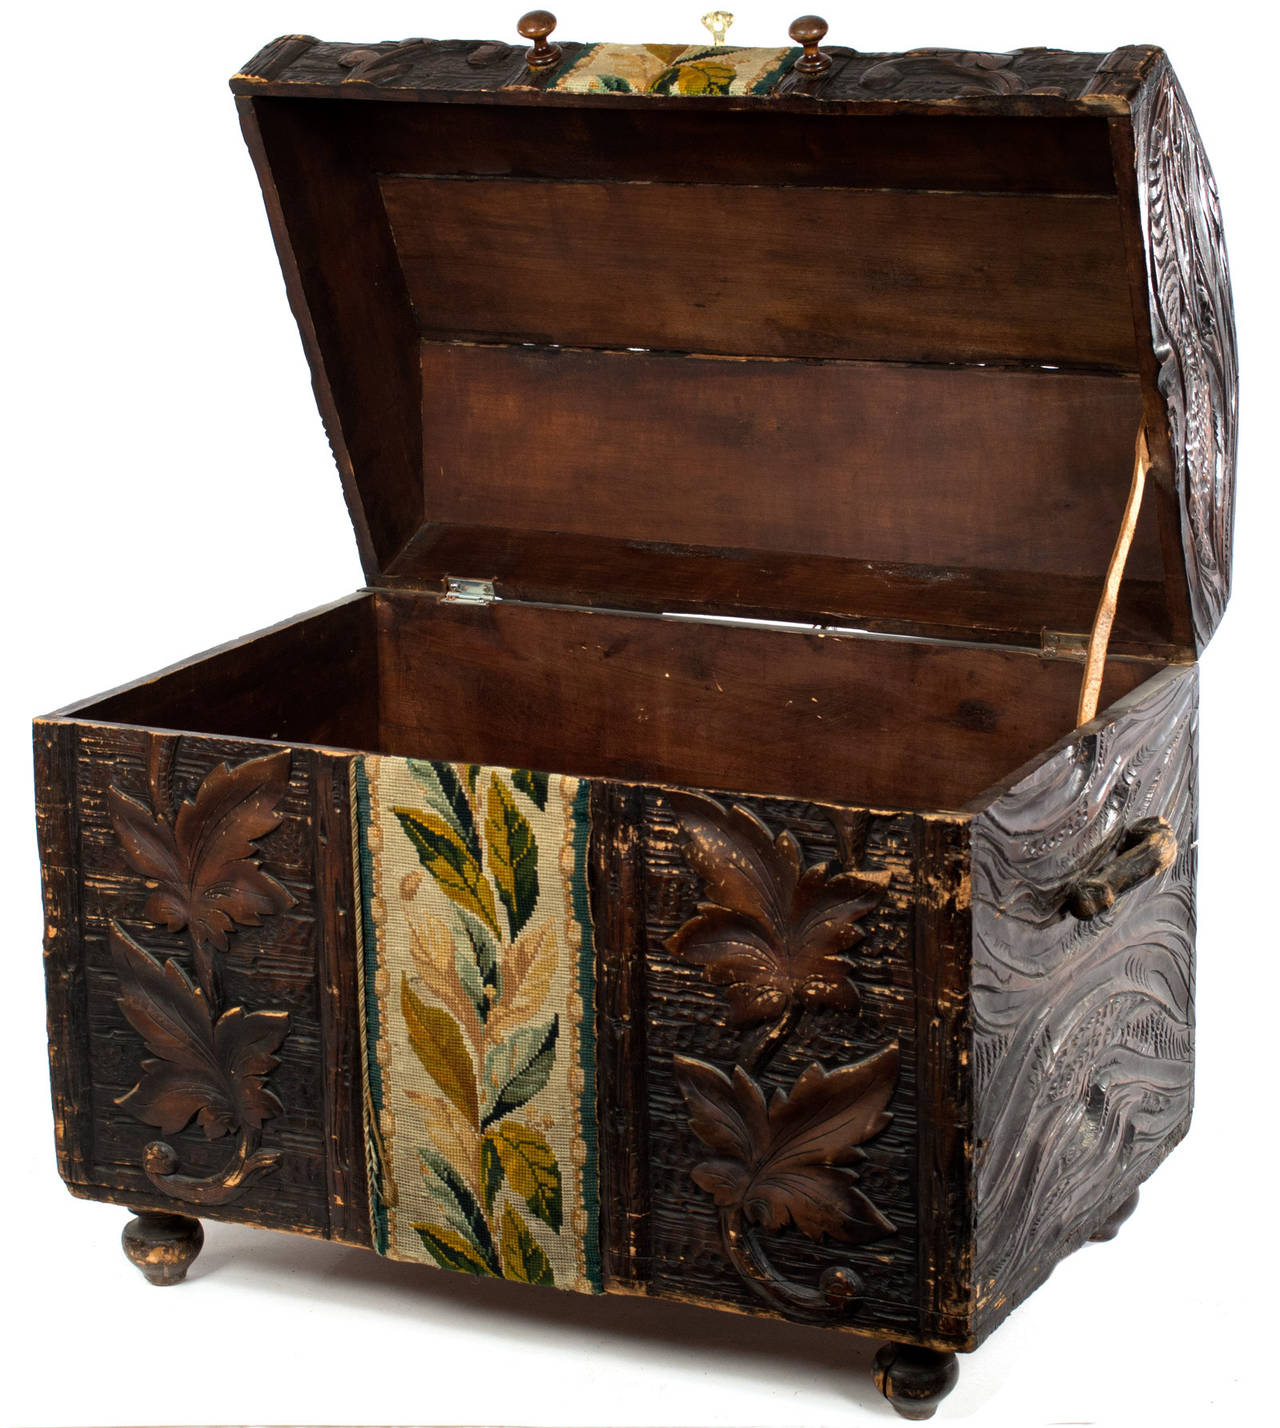 Elaborately carved with patterns of leaves, vines, grooves, and bark this Hungarian  chest has a gros-point needlework tapestry runner along its top and front. With original leather handles, this work is remarkable both for its artistry and for